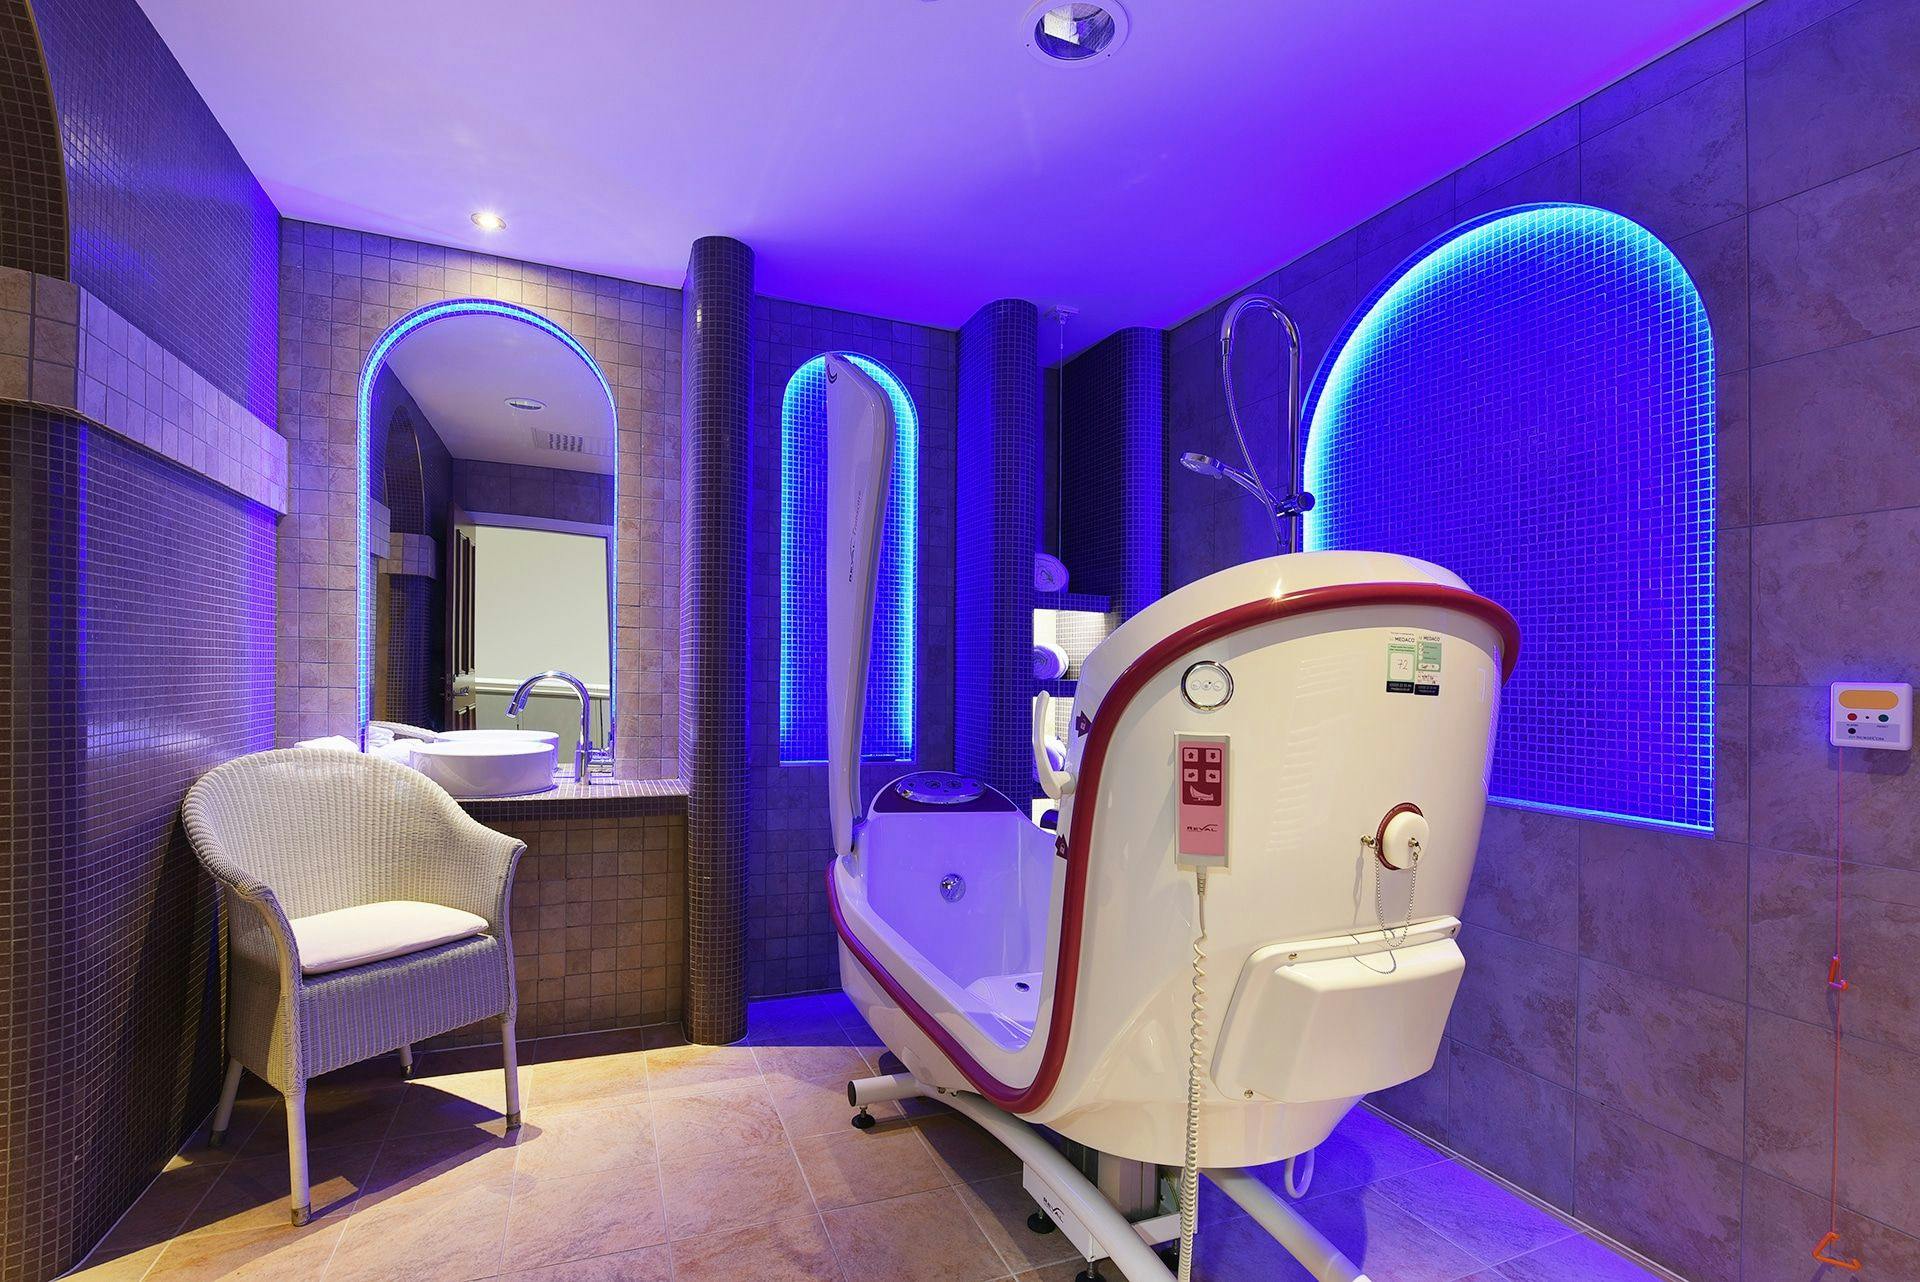 Spa bath of Brentwood Arches care home in Brentwood, Essex